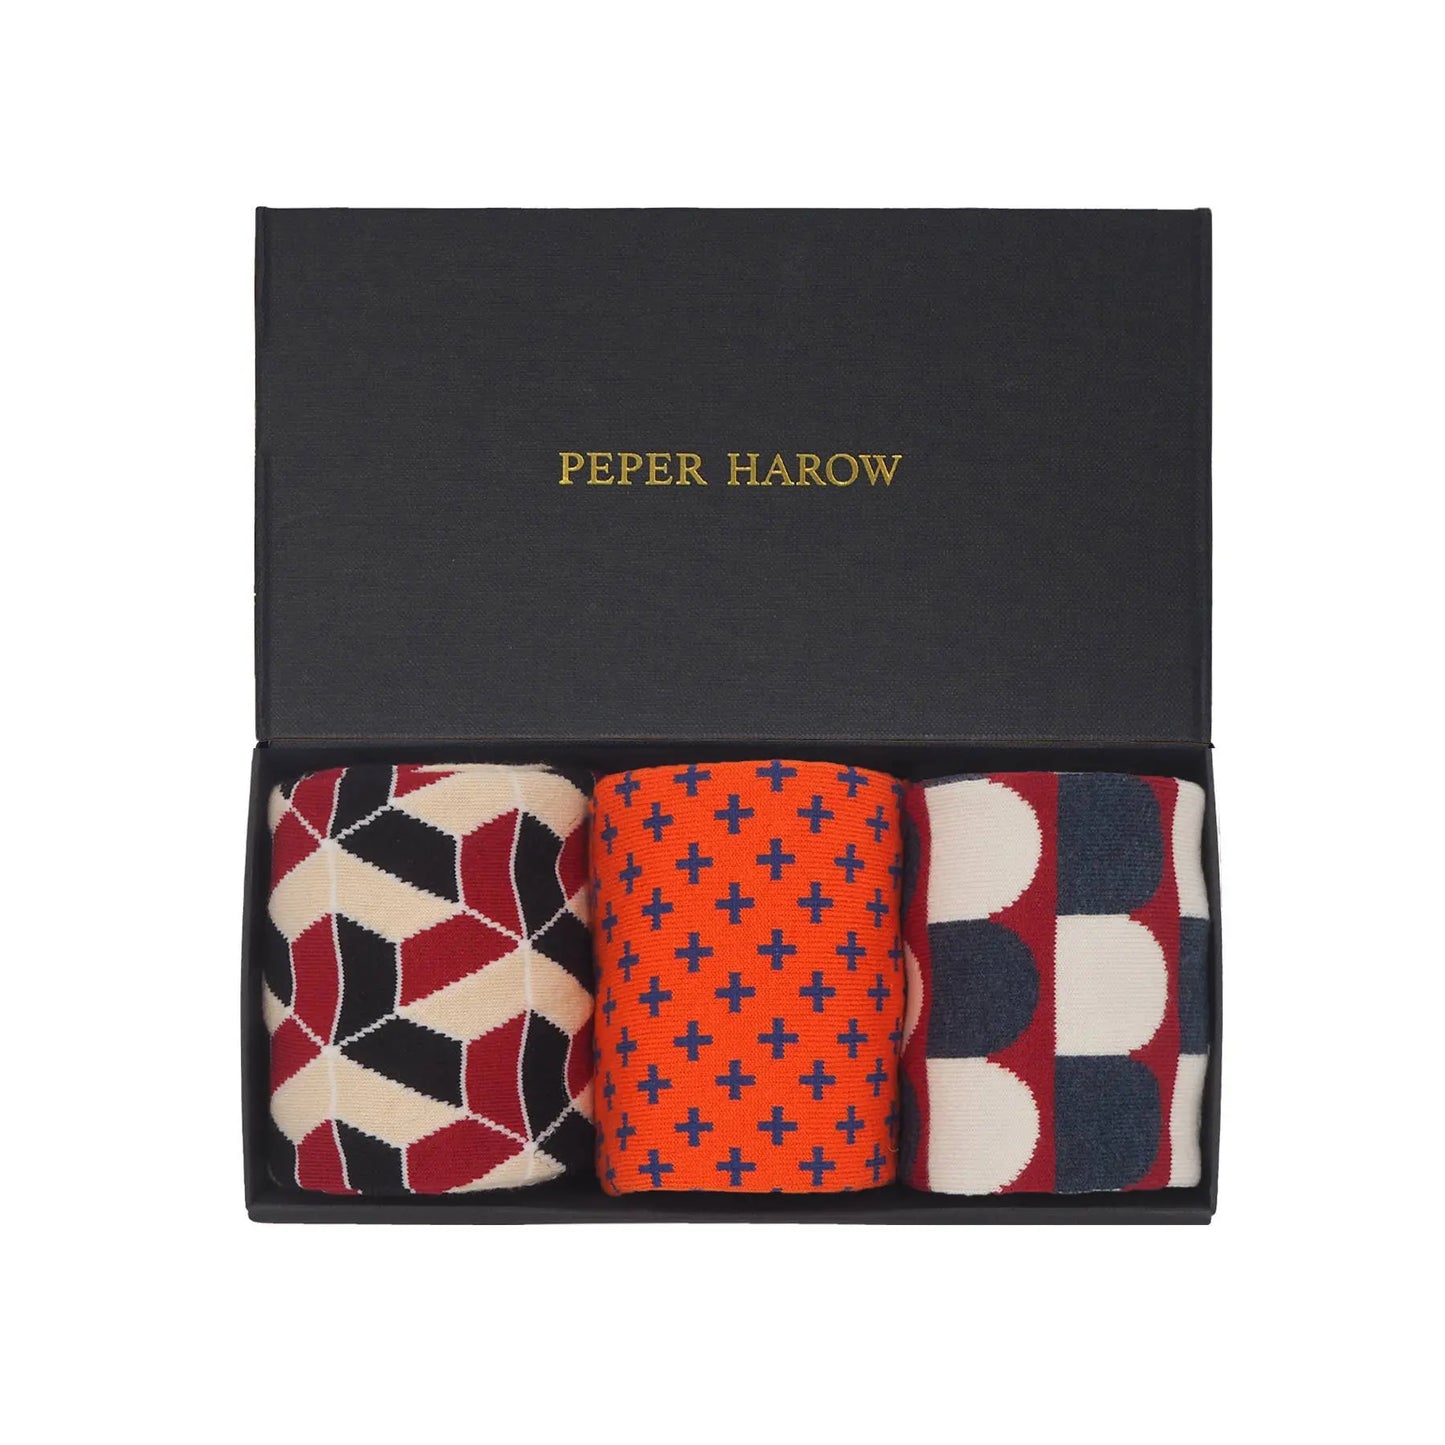 Buy Peper Harow Quirky Men's Gift Box | s at Woven Durham